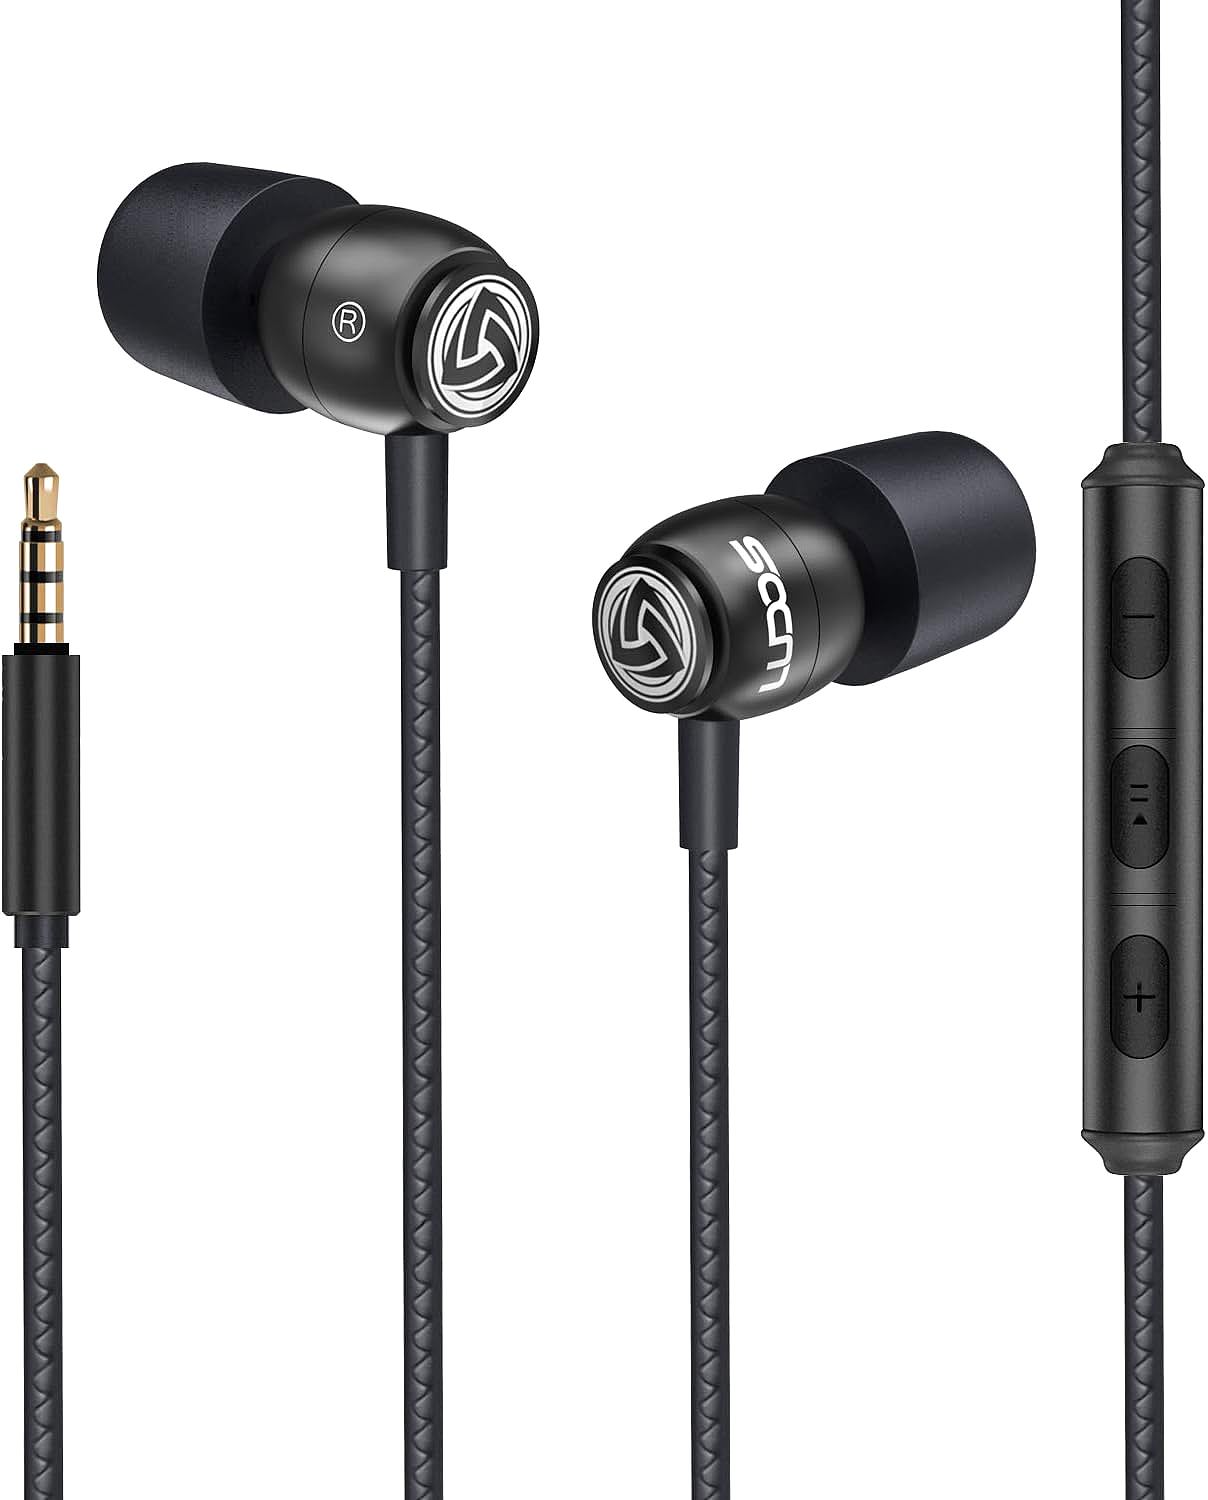  Ludos Clamor 3.5mm Wired Earbuds      